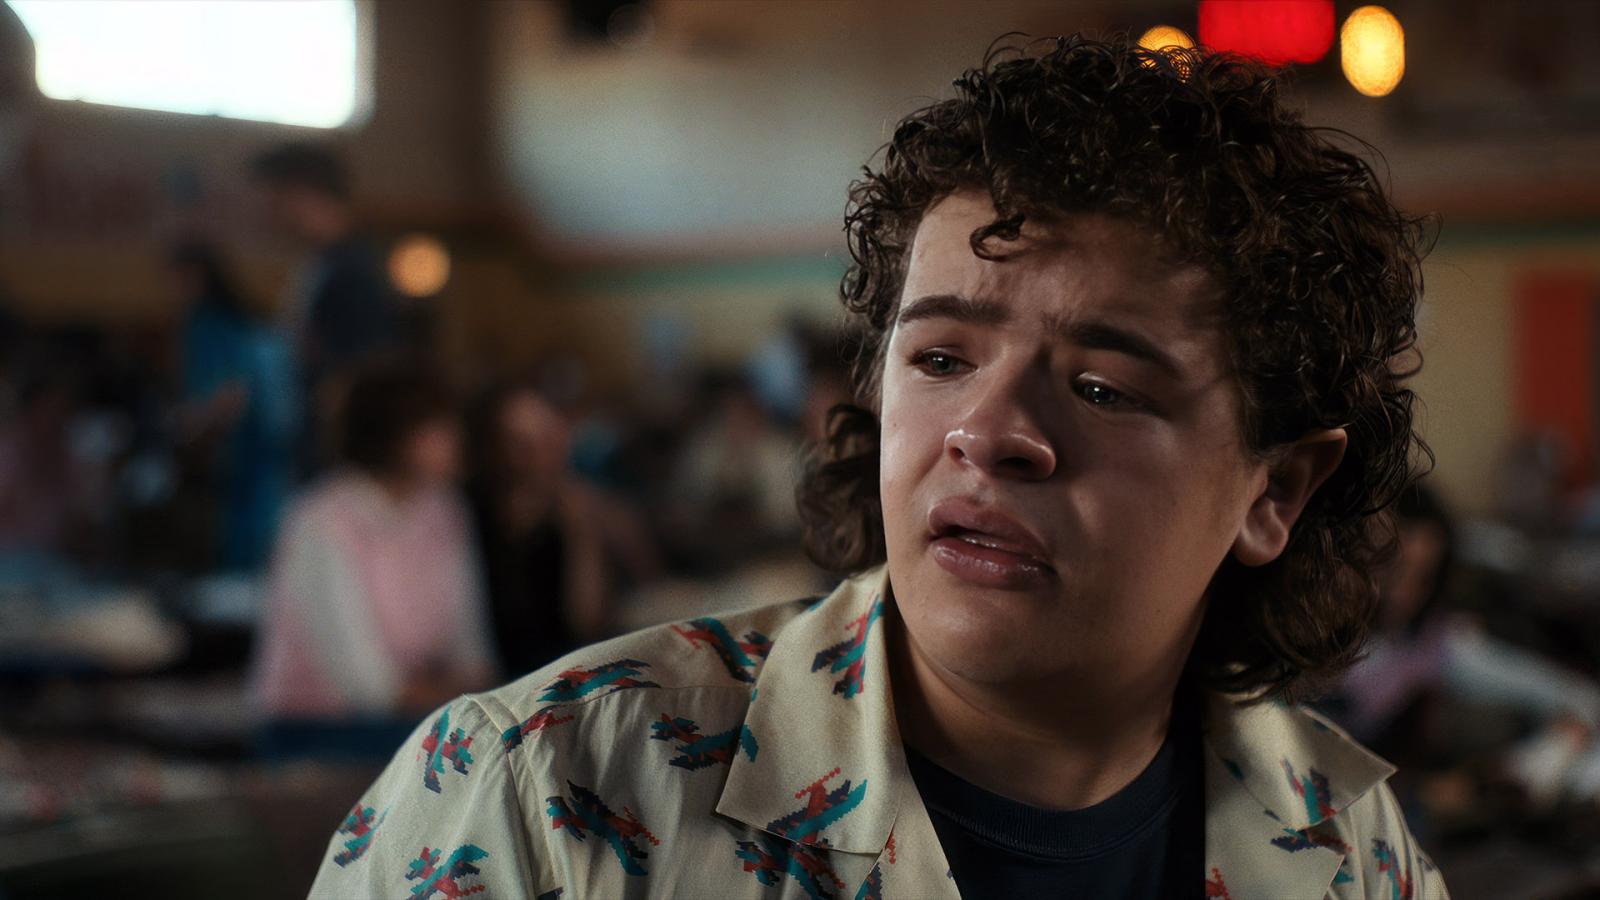 Which Stranger Things Character Are You Based On Your Zodiac Sign? - image 3